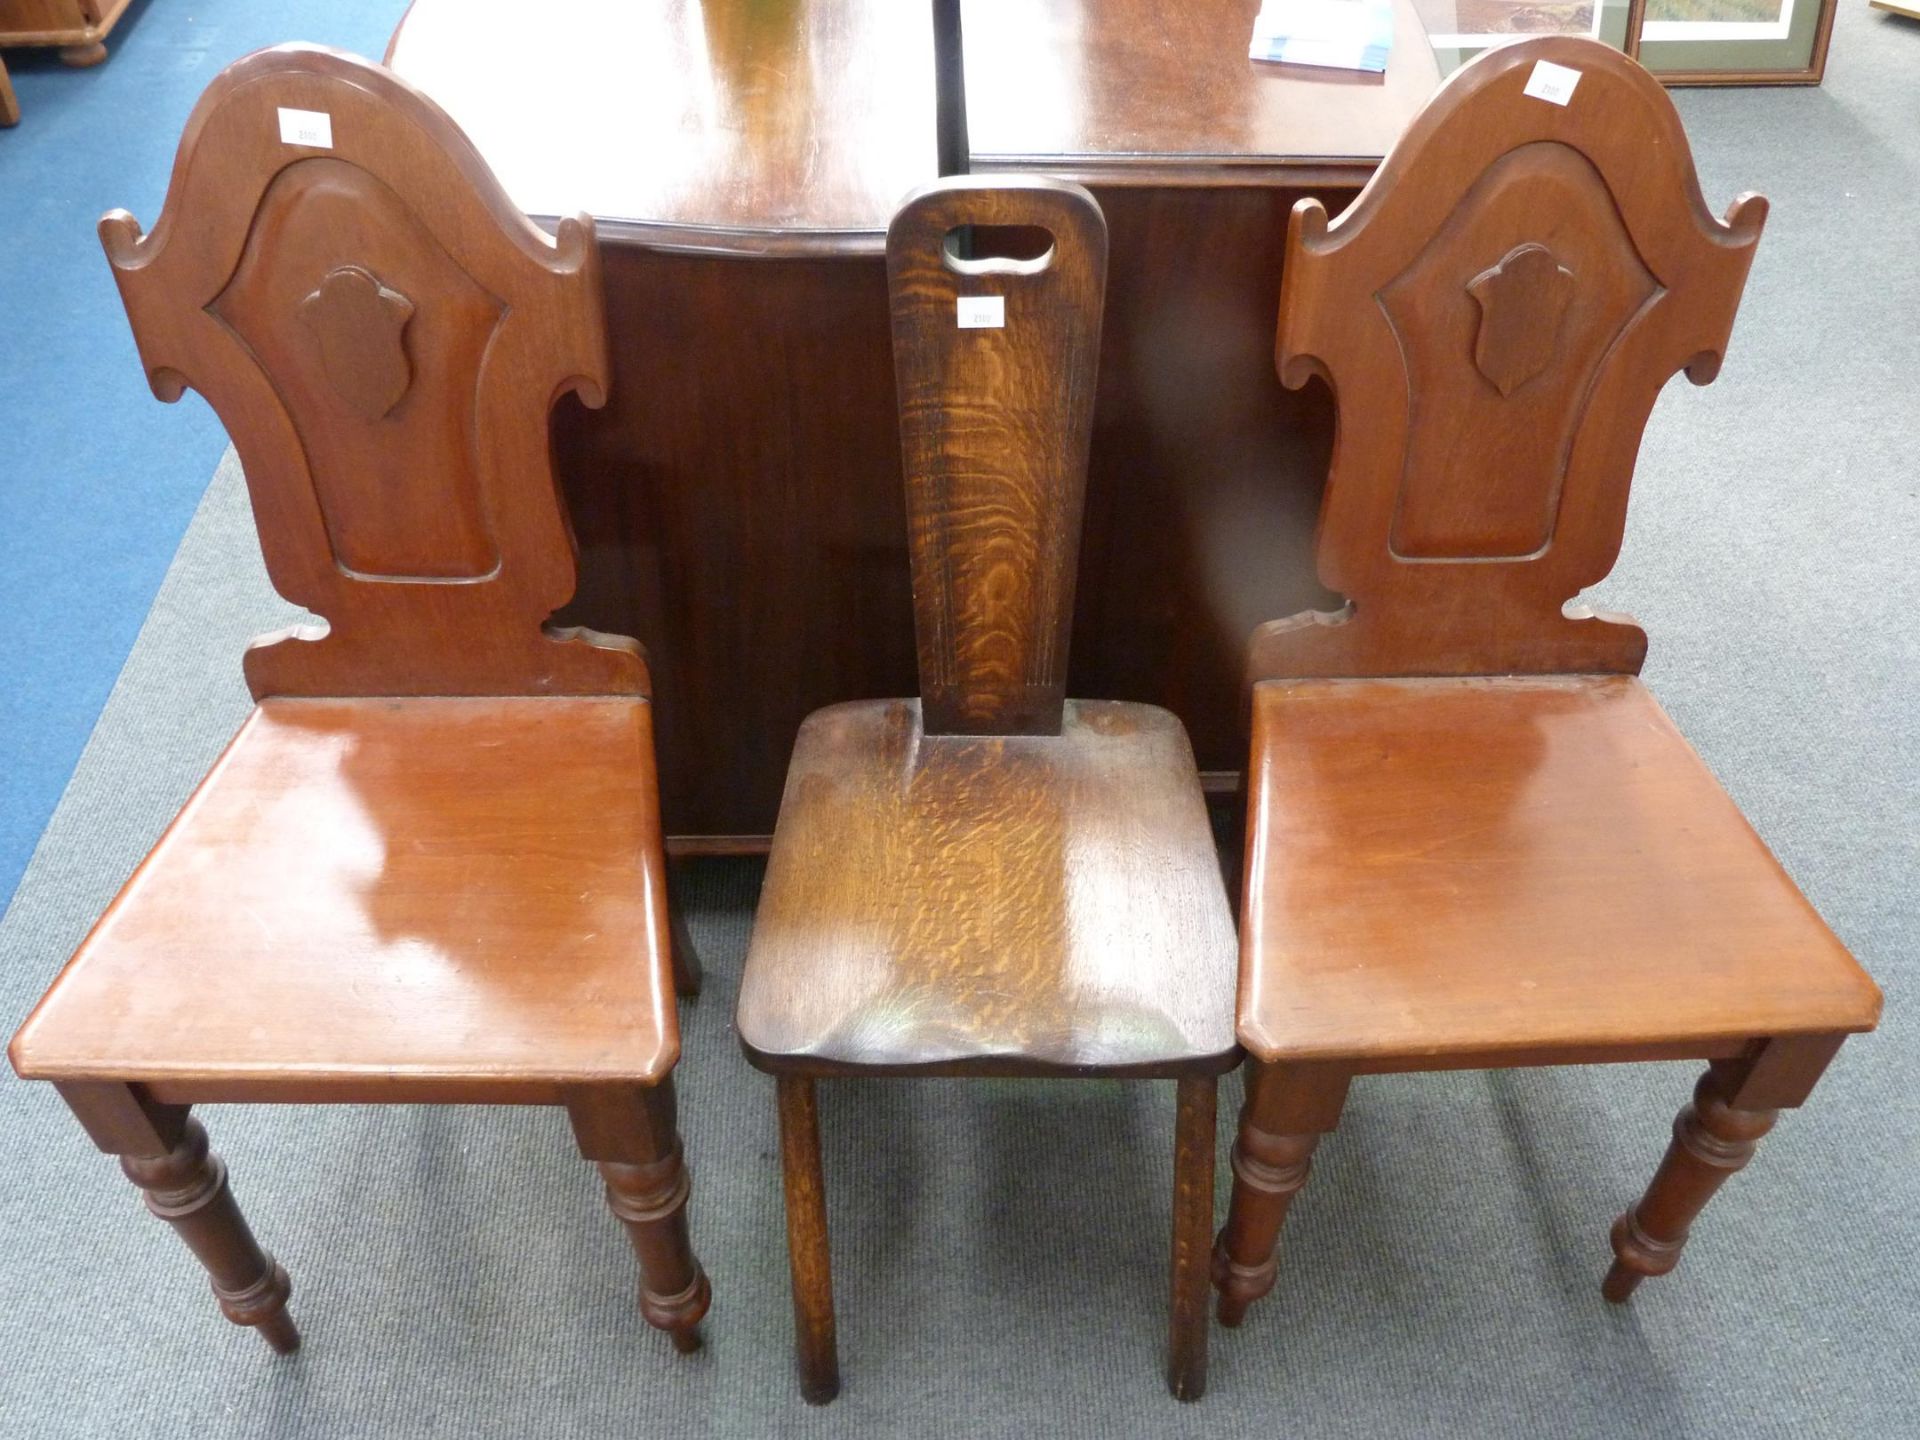 A Pair of Victorian Shield Back Hall Chairs together with an Oak Spinning Chair. (Est. £40 - £60)